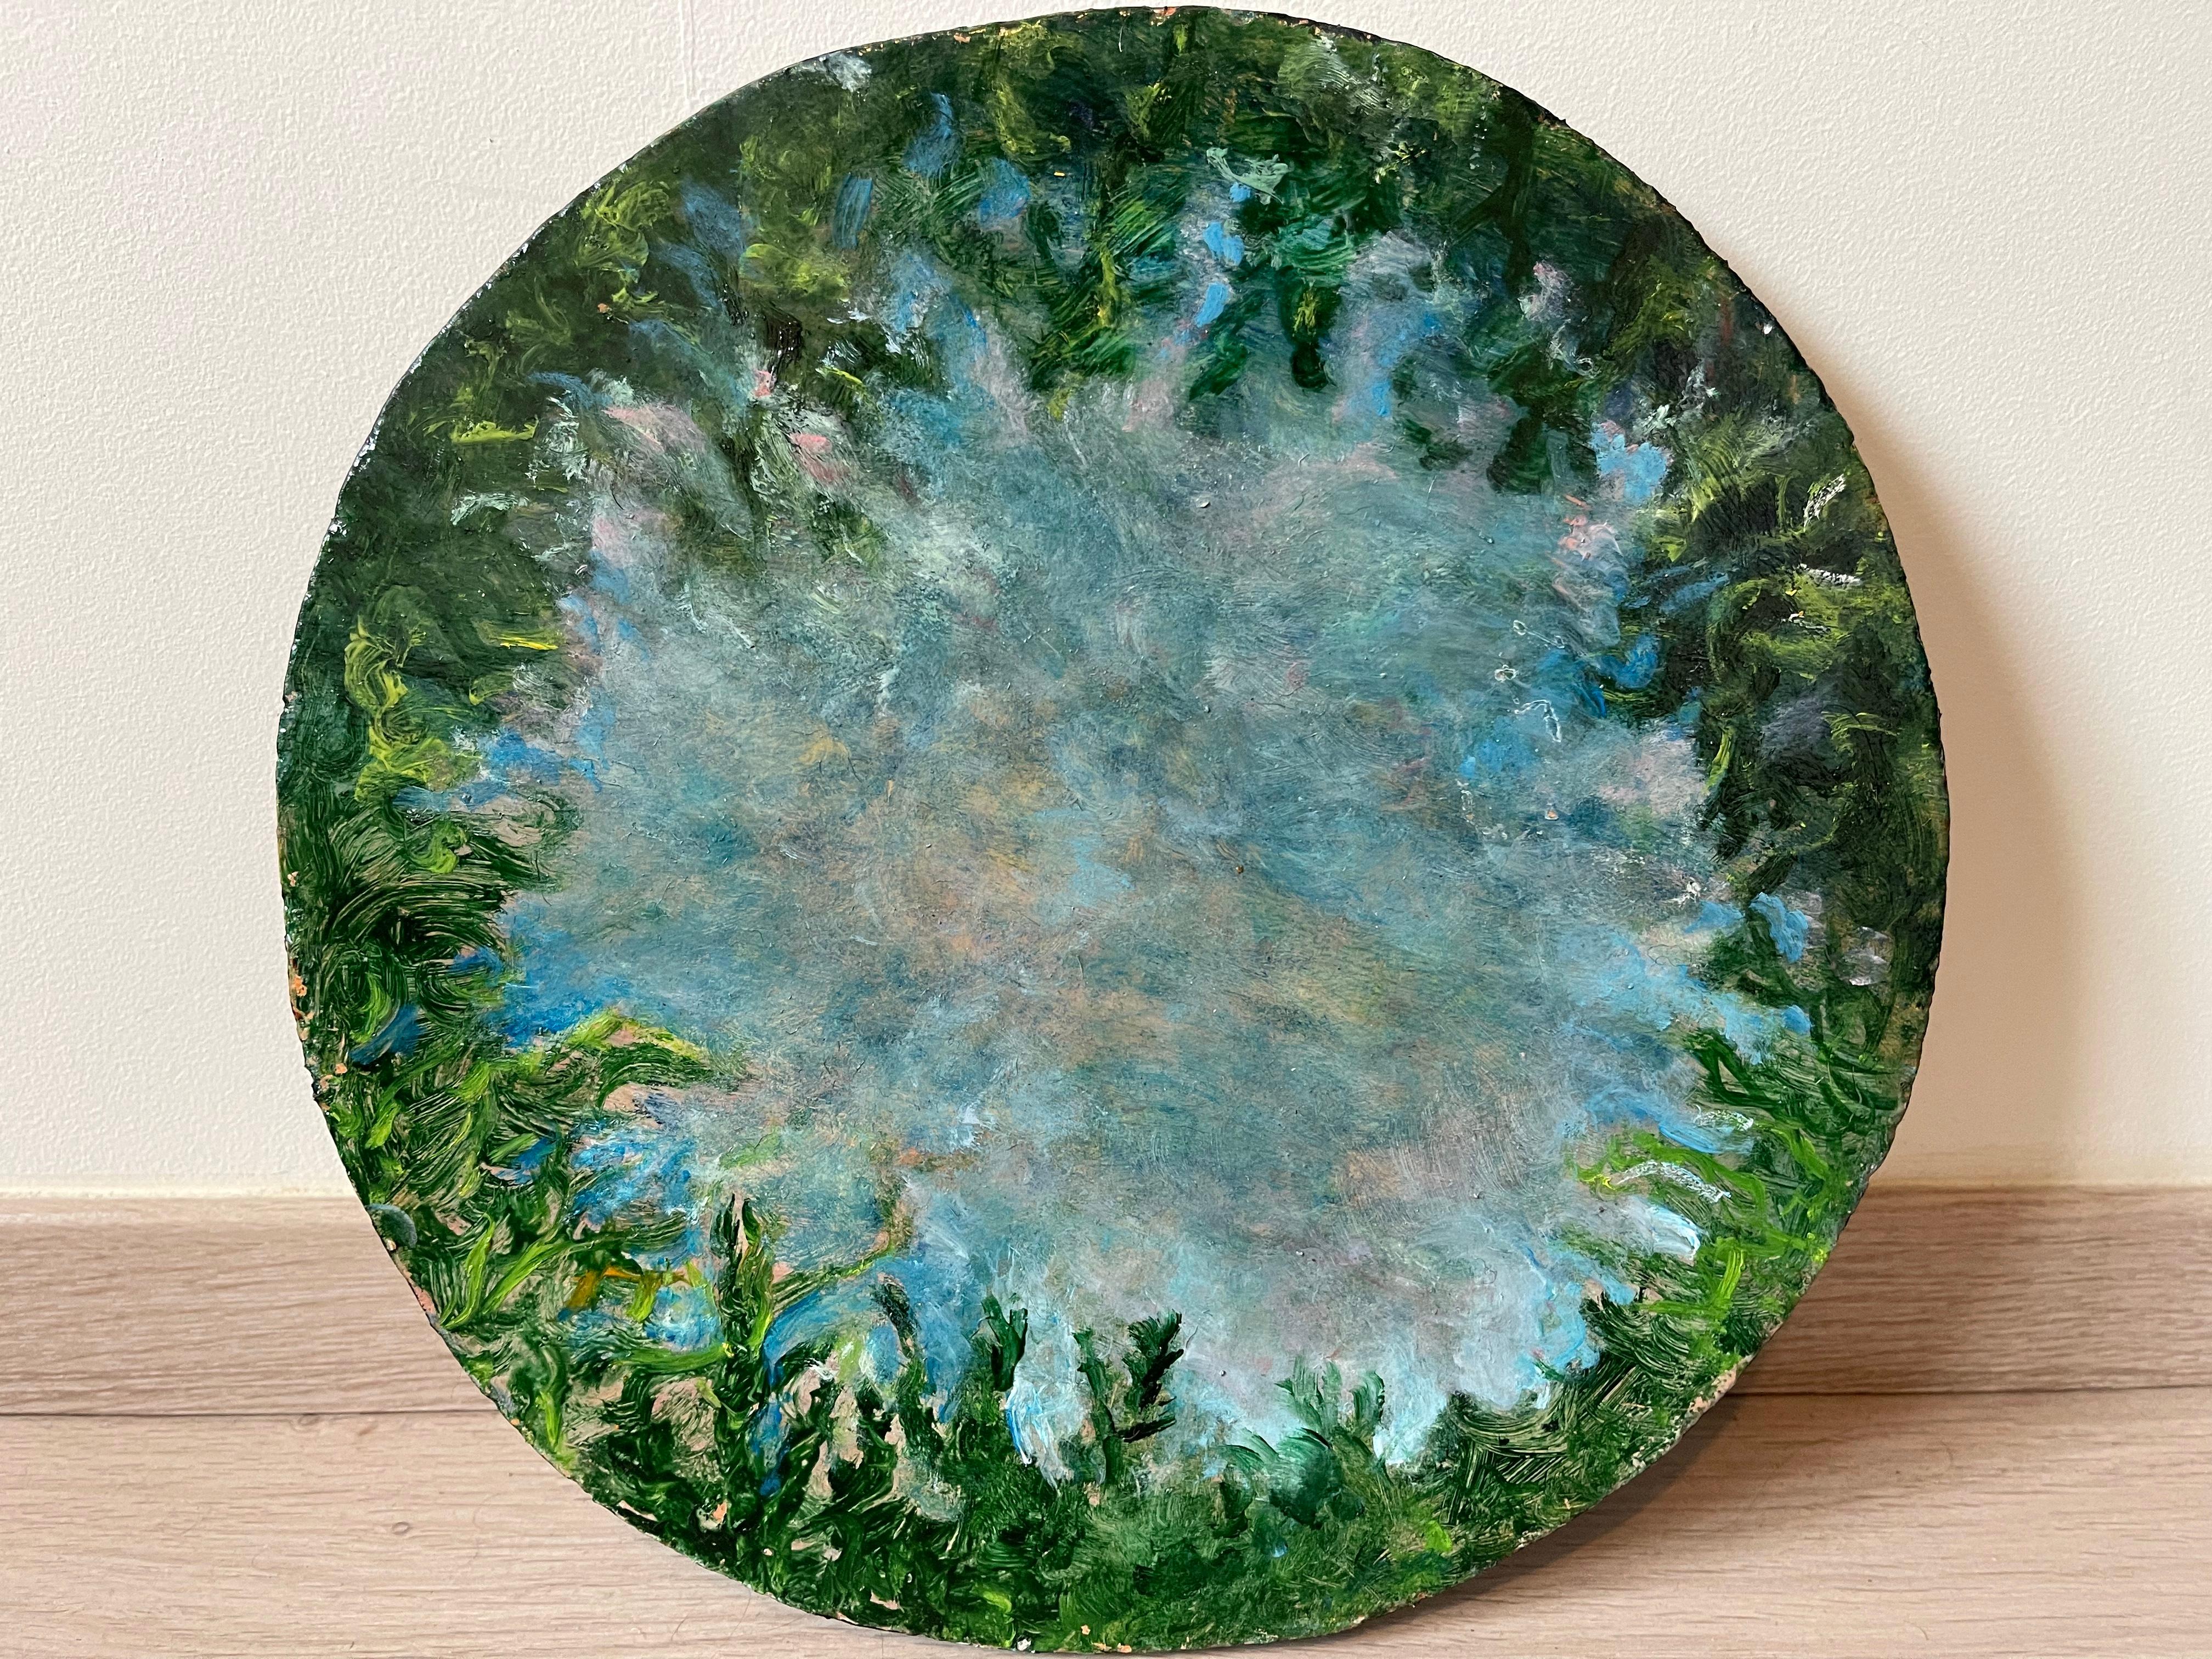 Spring Circle 3 - Elodie Huré
Oil on wood
Diameter: 34cm
February 2021
Signed on the back




Visual artist, videographer and collagist, also trained at the theater school, Elodie Huré expresses herself mainly through painting. With